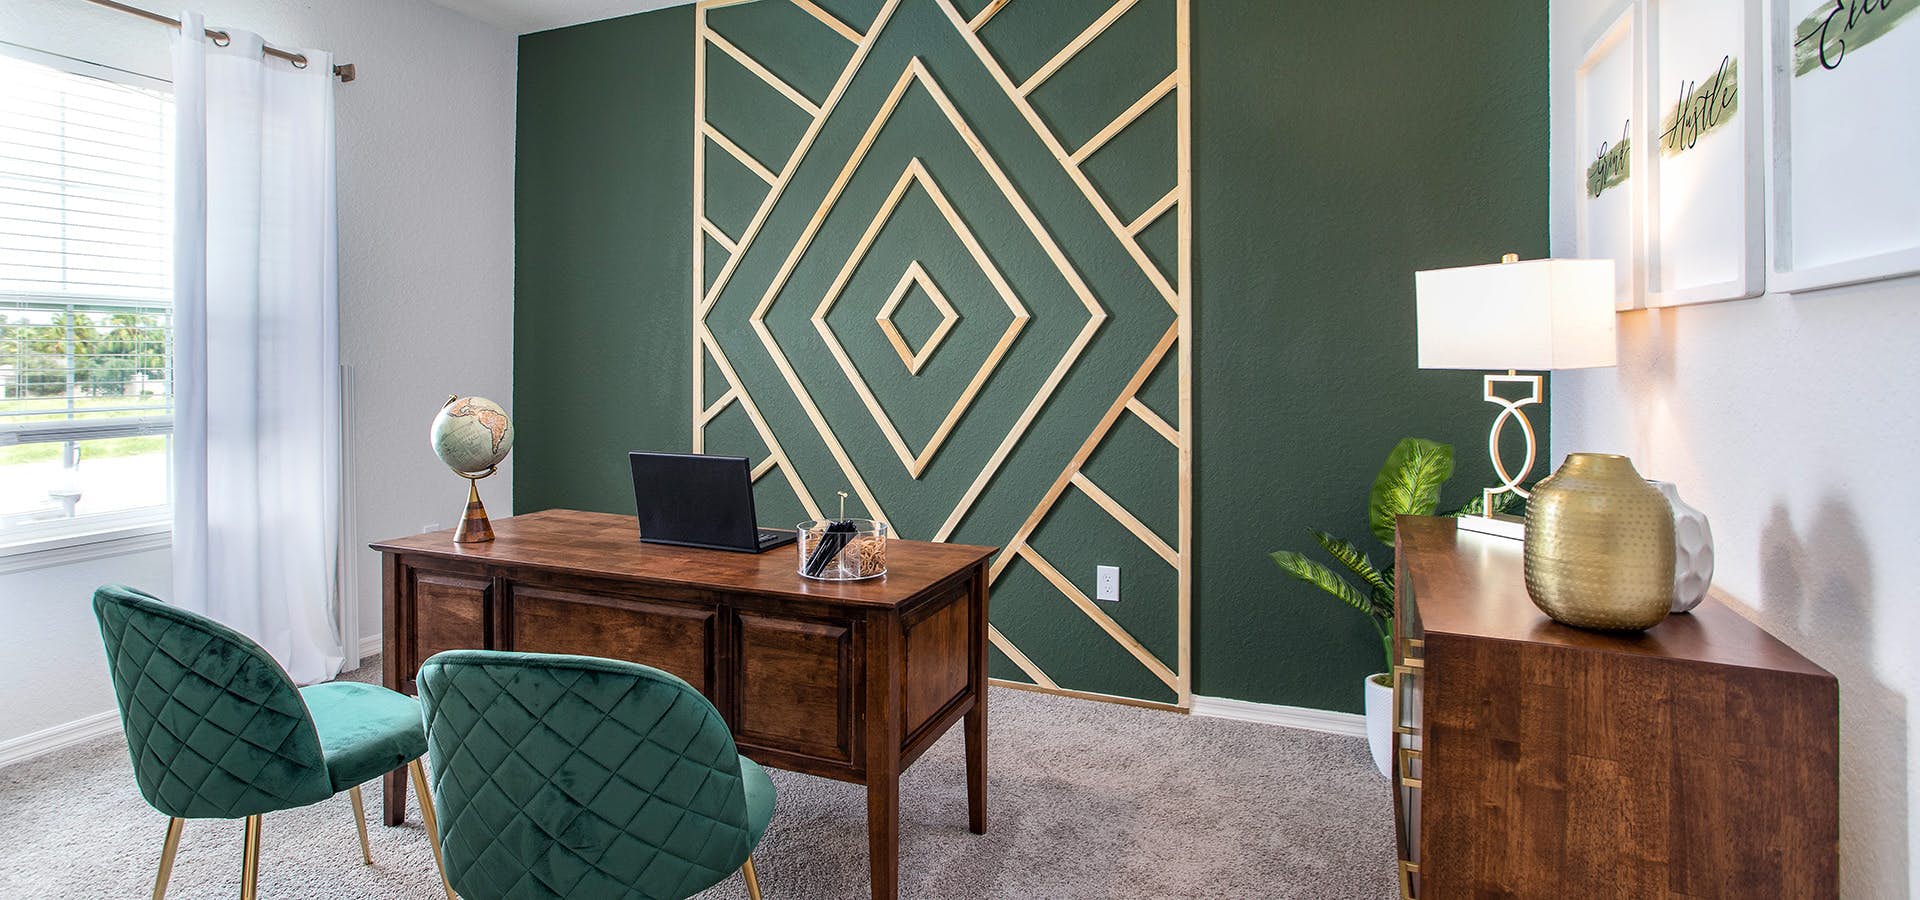 Glam home office decor with green and gold art deco accent wall